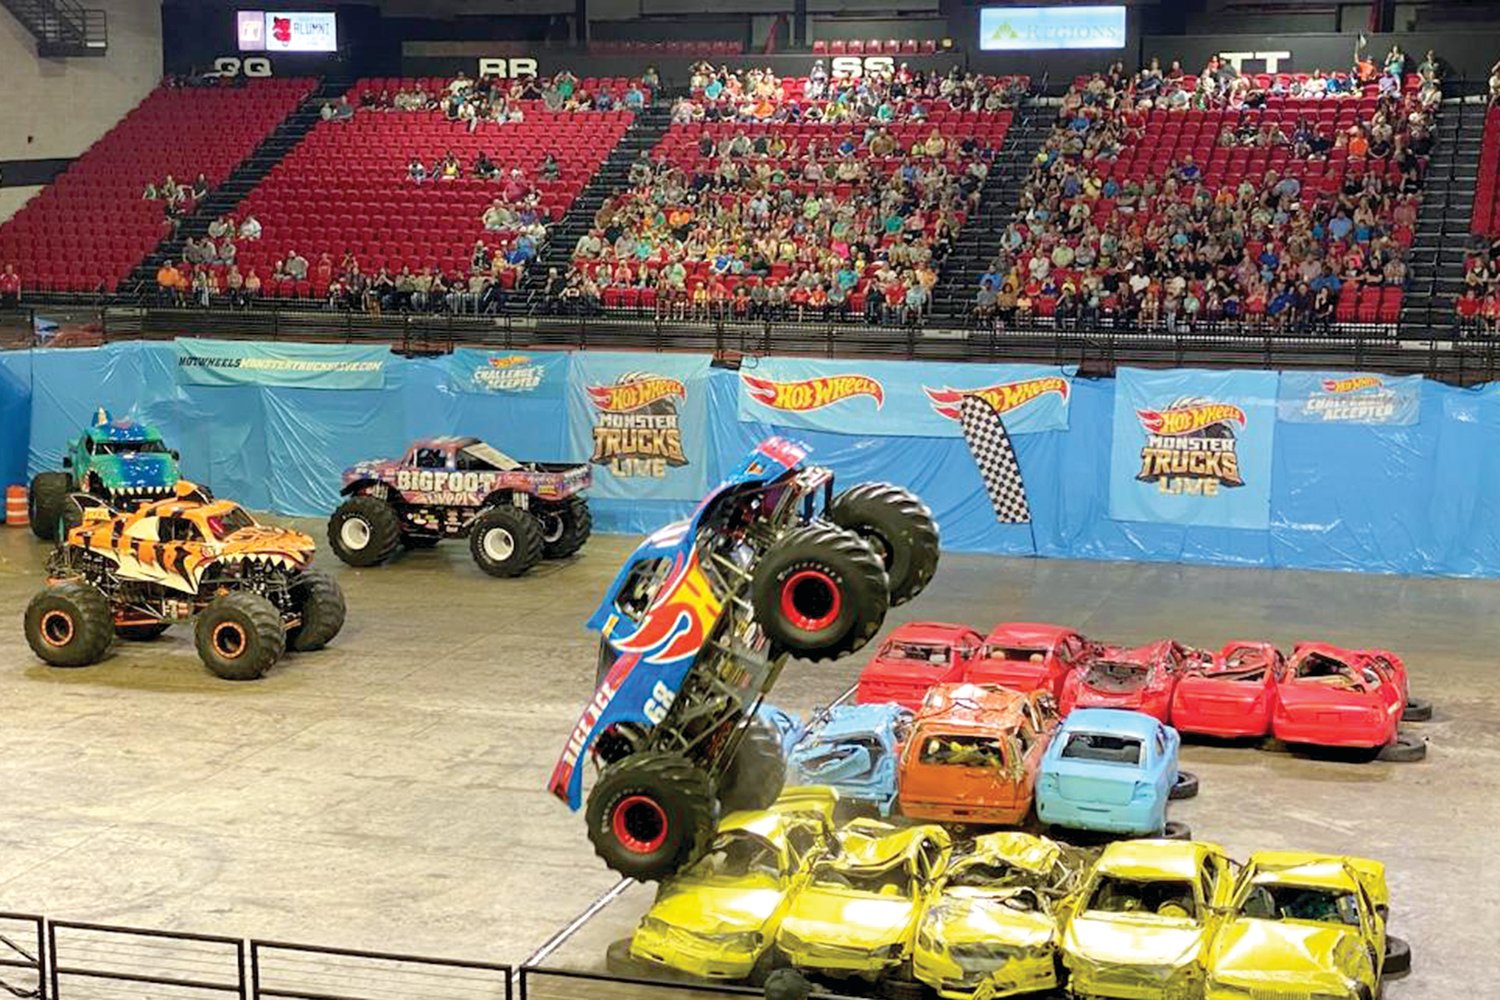 The legendary Big Foot, driven by State Tech student Eric Steinberg is wrapping up the Hot Wheels Monster Trucks Live tour and will be at outdoor events this summer.